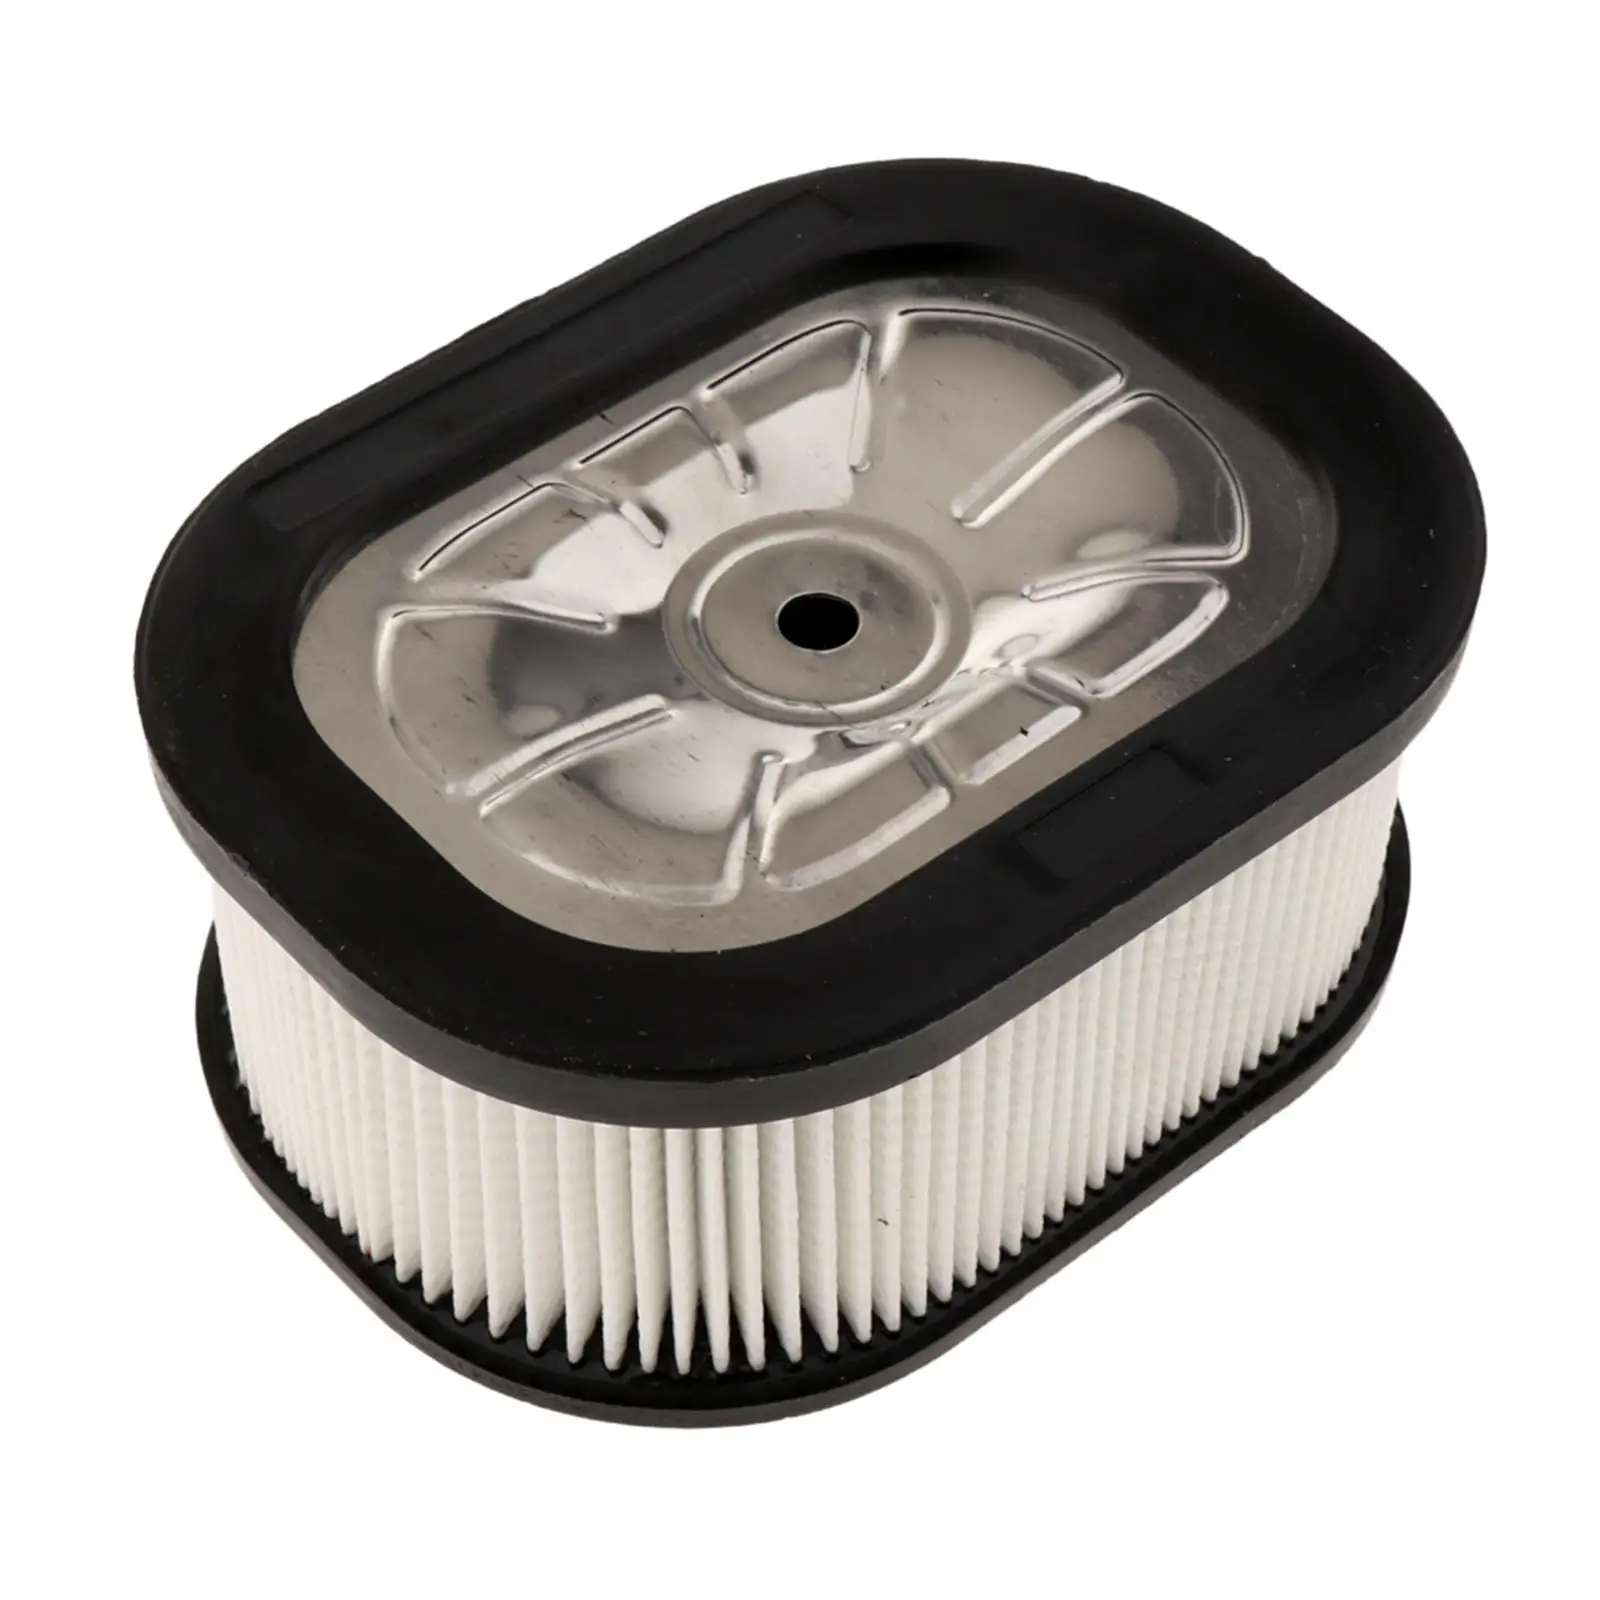 Air Filter Durable Replacements Mower Machine Air Filter with Insert Foam for Chain Saw MS440 DIY Garden Supplies Part